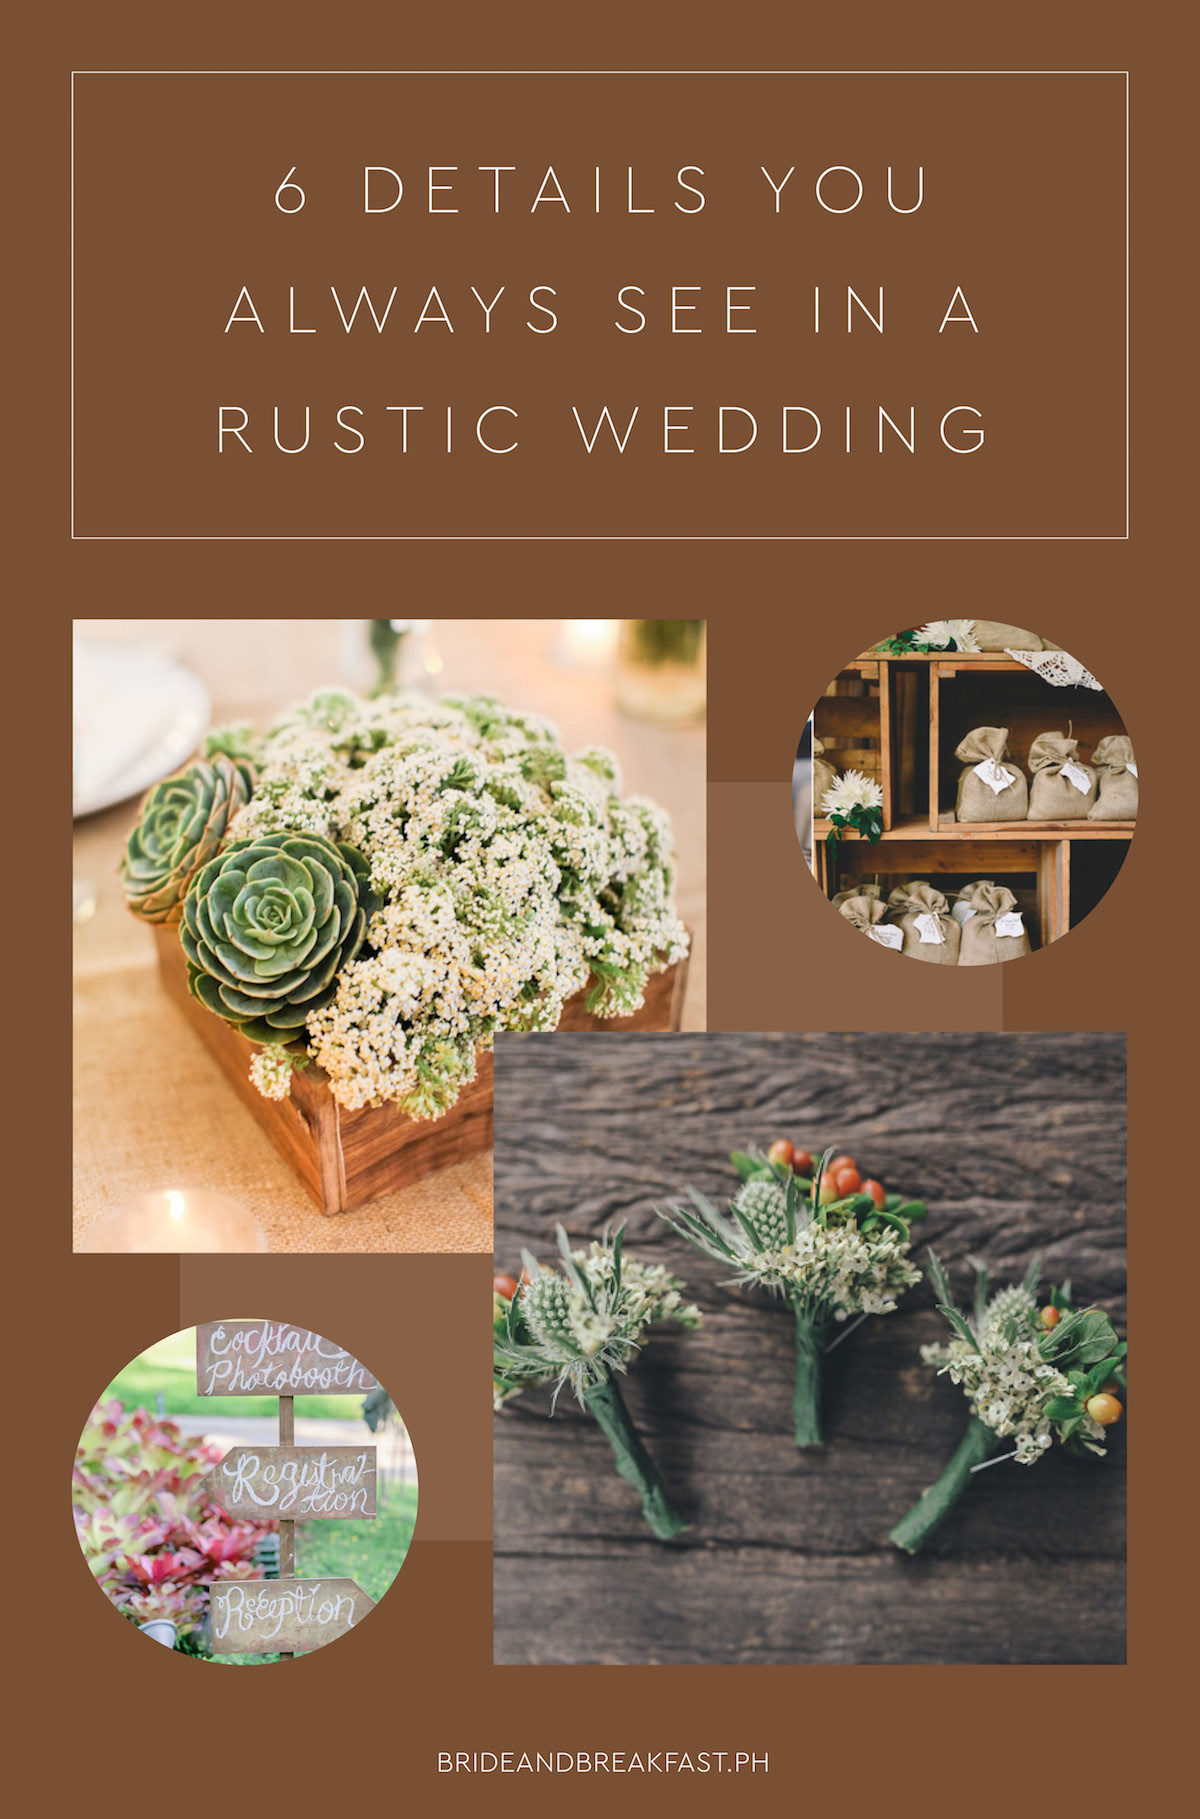 6 Details You Always See in A Rustic Wedding